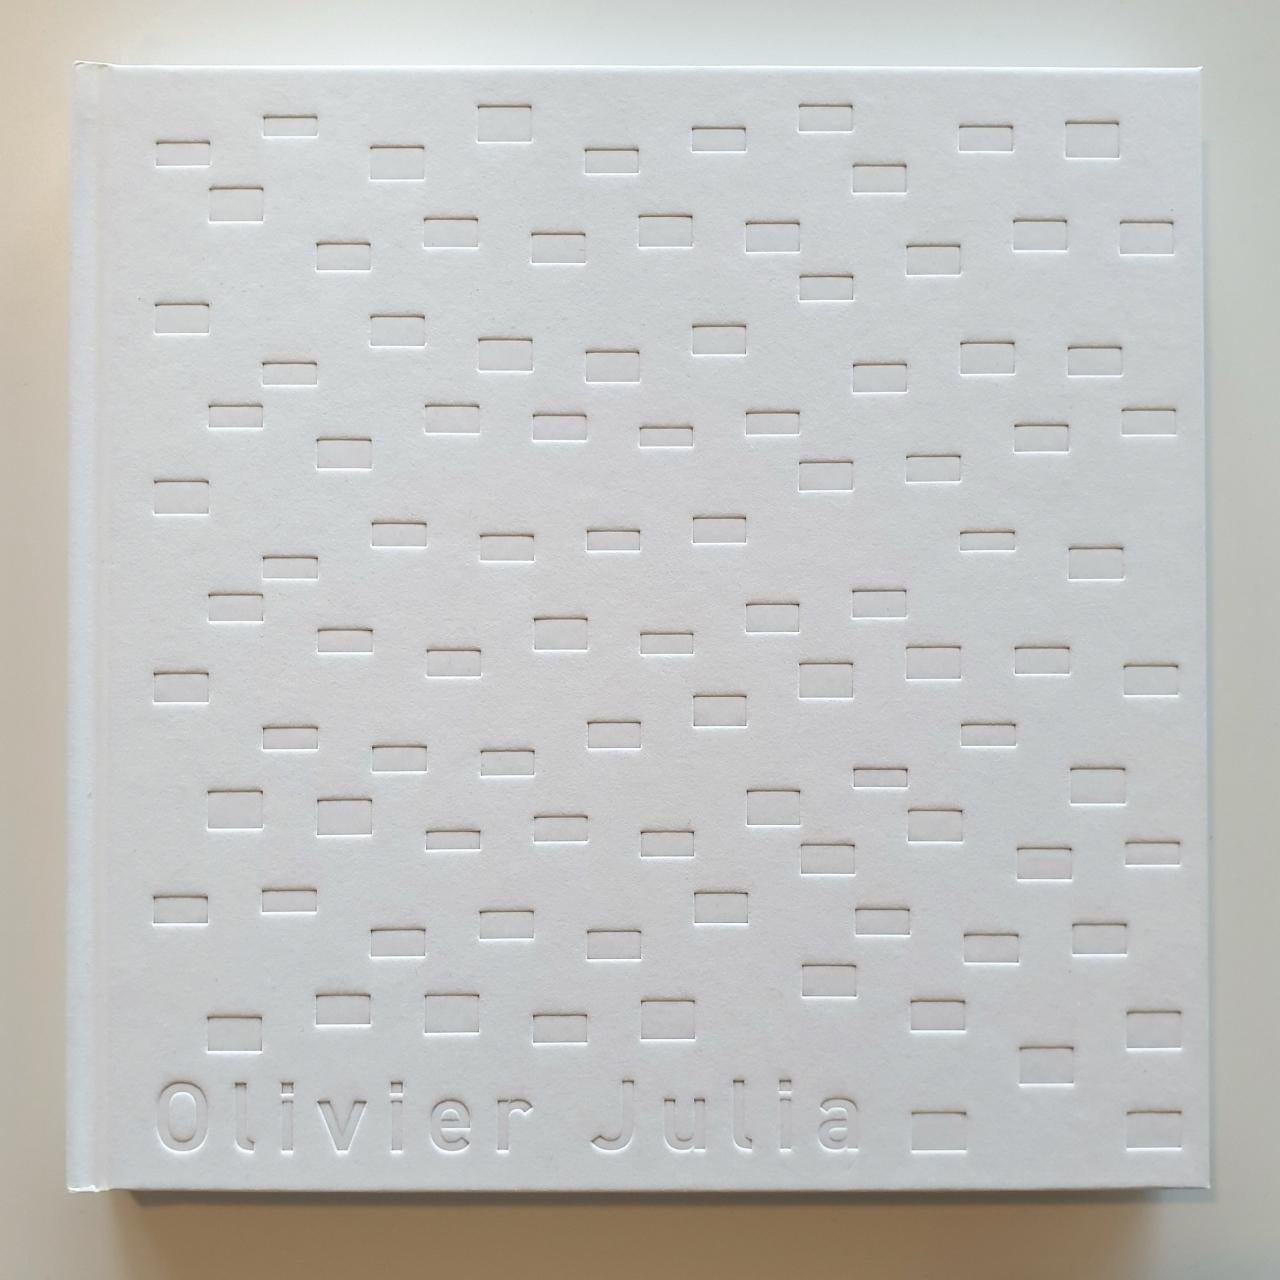 Variation rythmique IX is the largest of the most recent series of seven different small and medium size contemporary modern sculpture painting reliefs by French-Dutch artist Olivier Julia. The relief is made from oak wood and finished with a